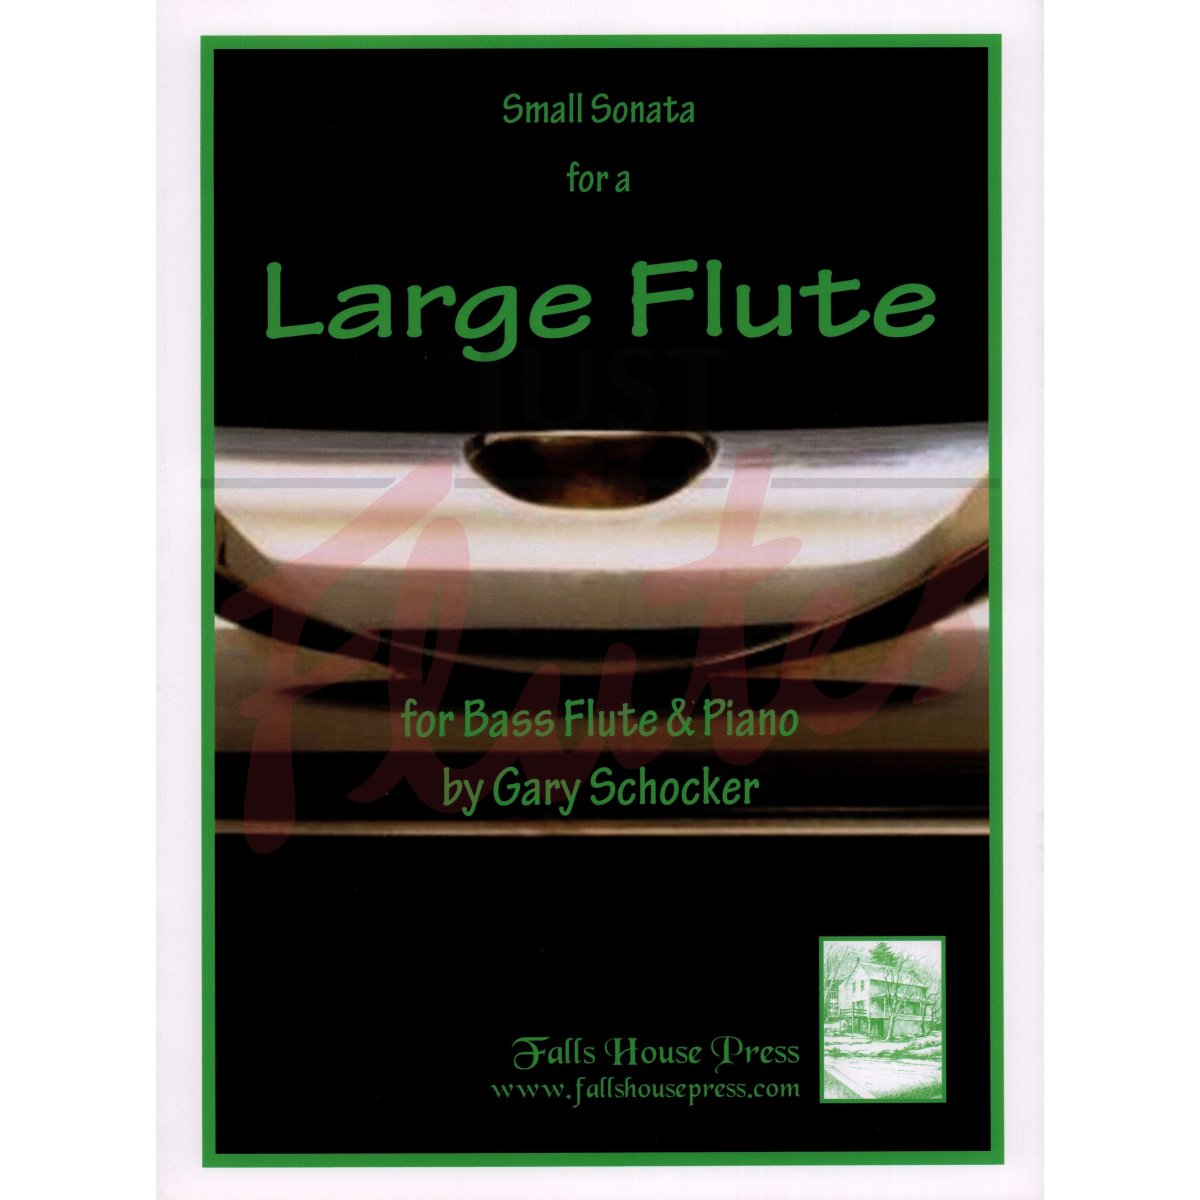 Small Sonata for a Large Flute for Bass Flute and Piano